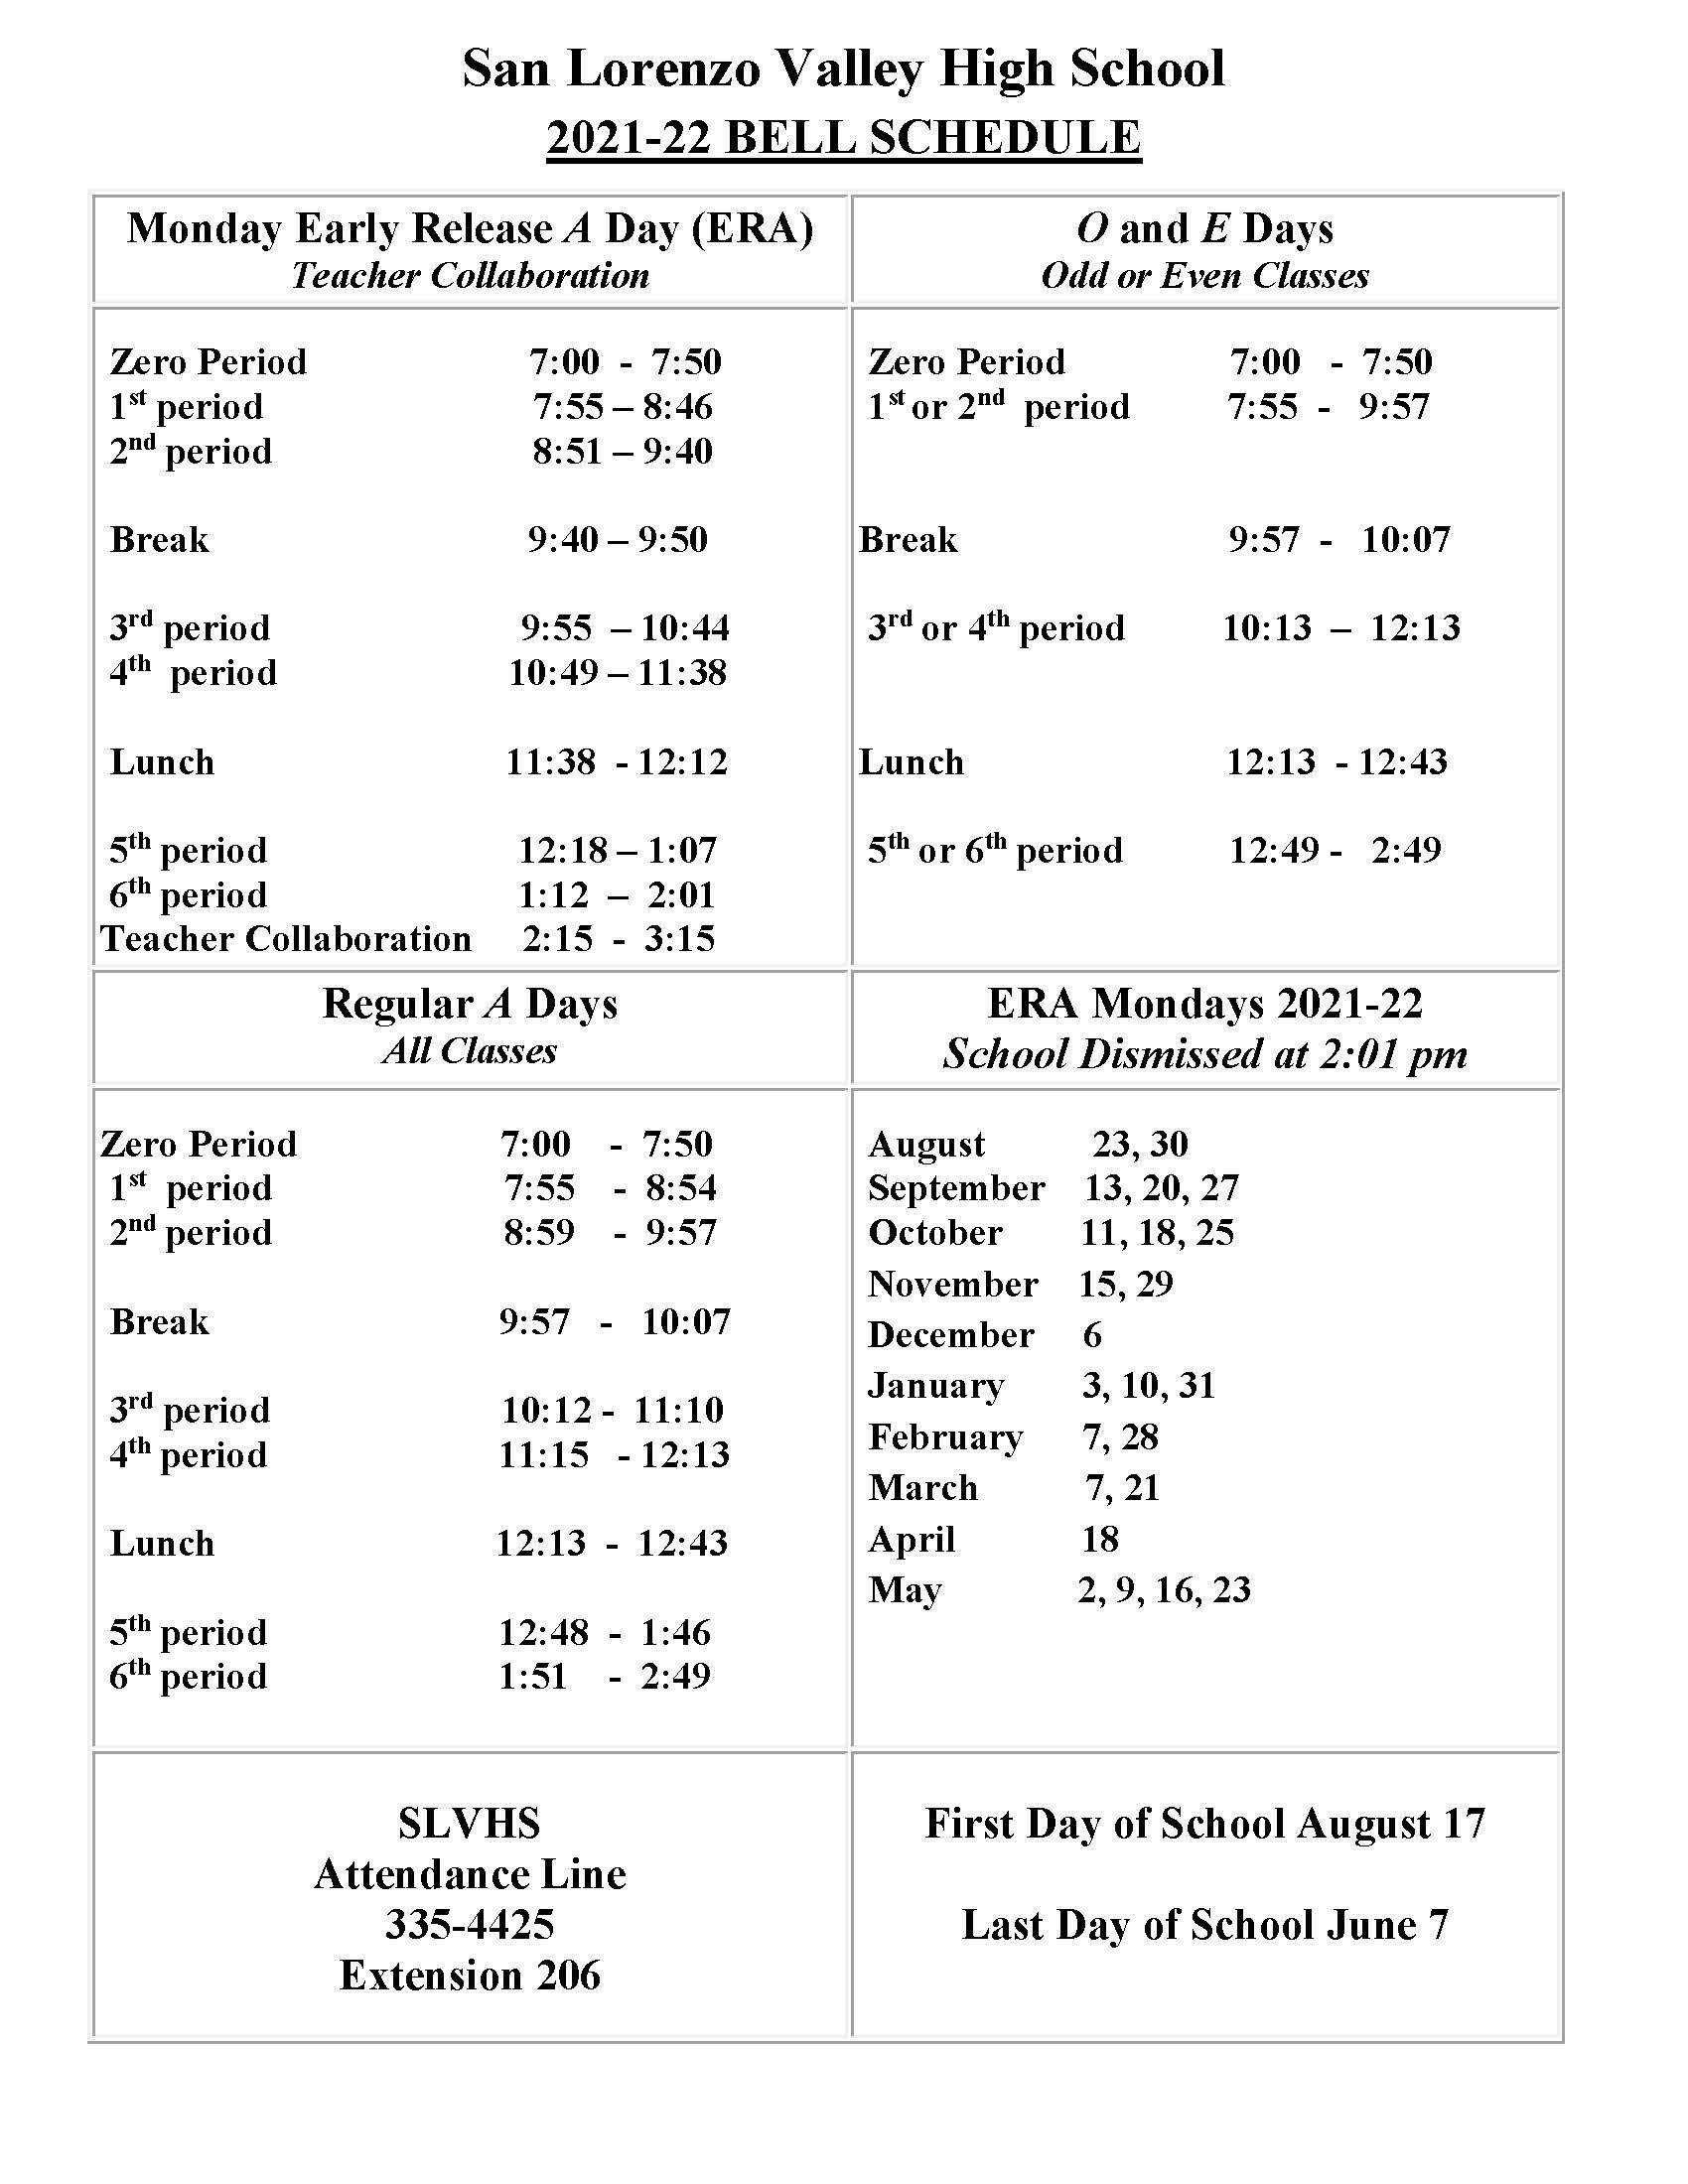 SLVHS Bell schedule; for details call 831-335-4425 x201